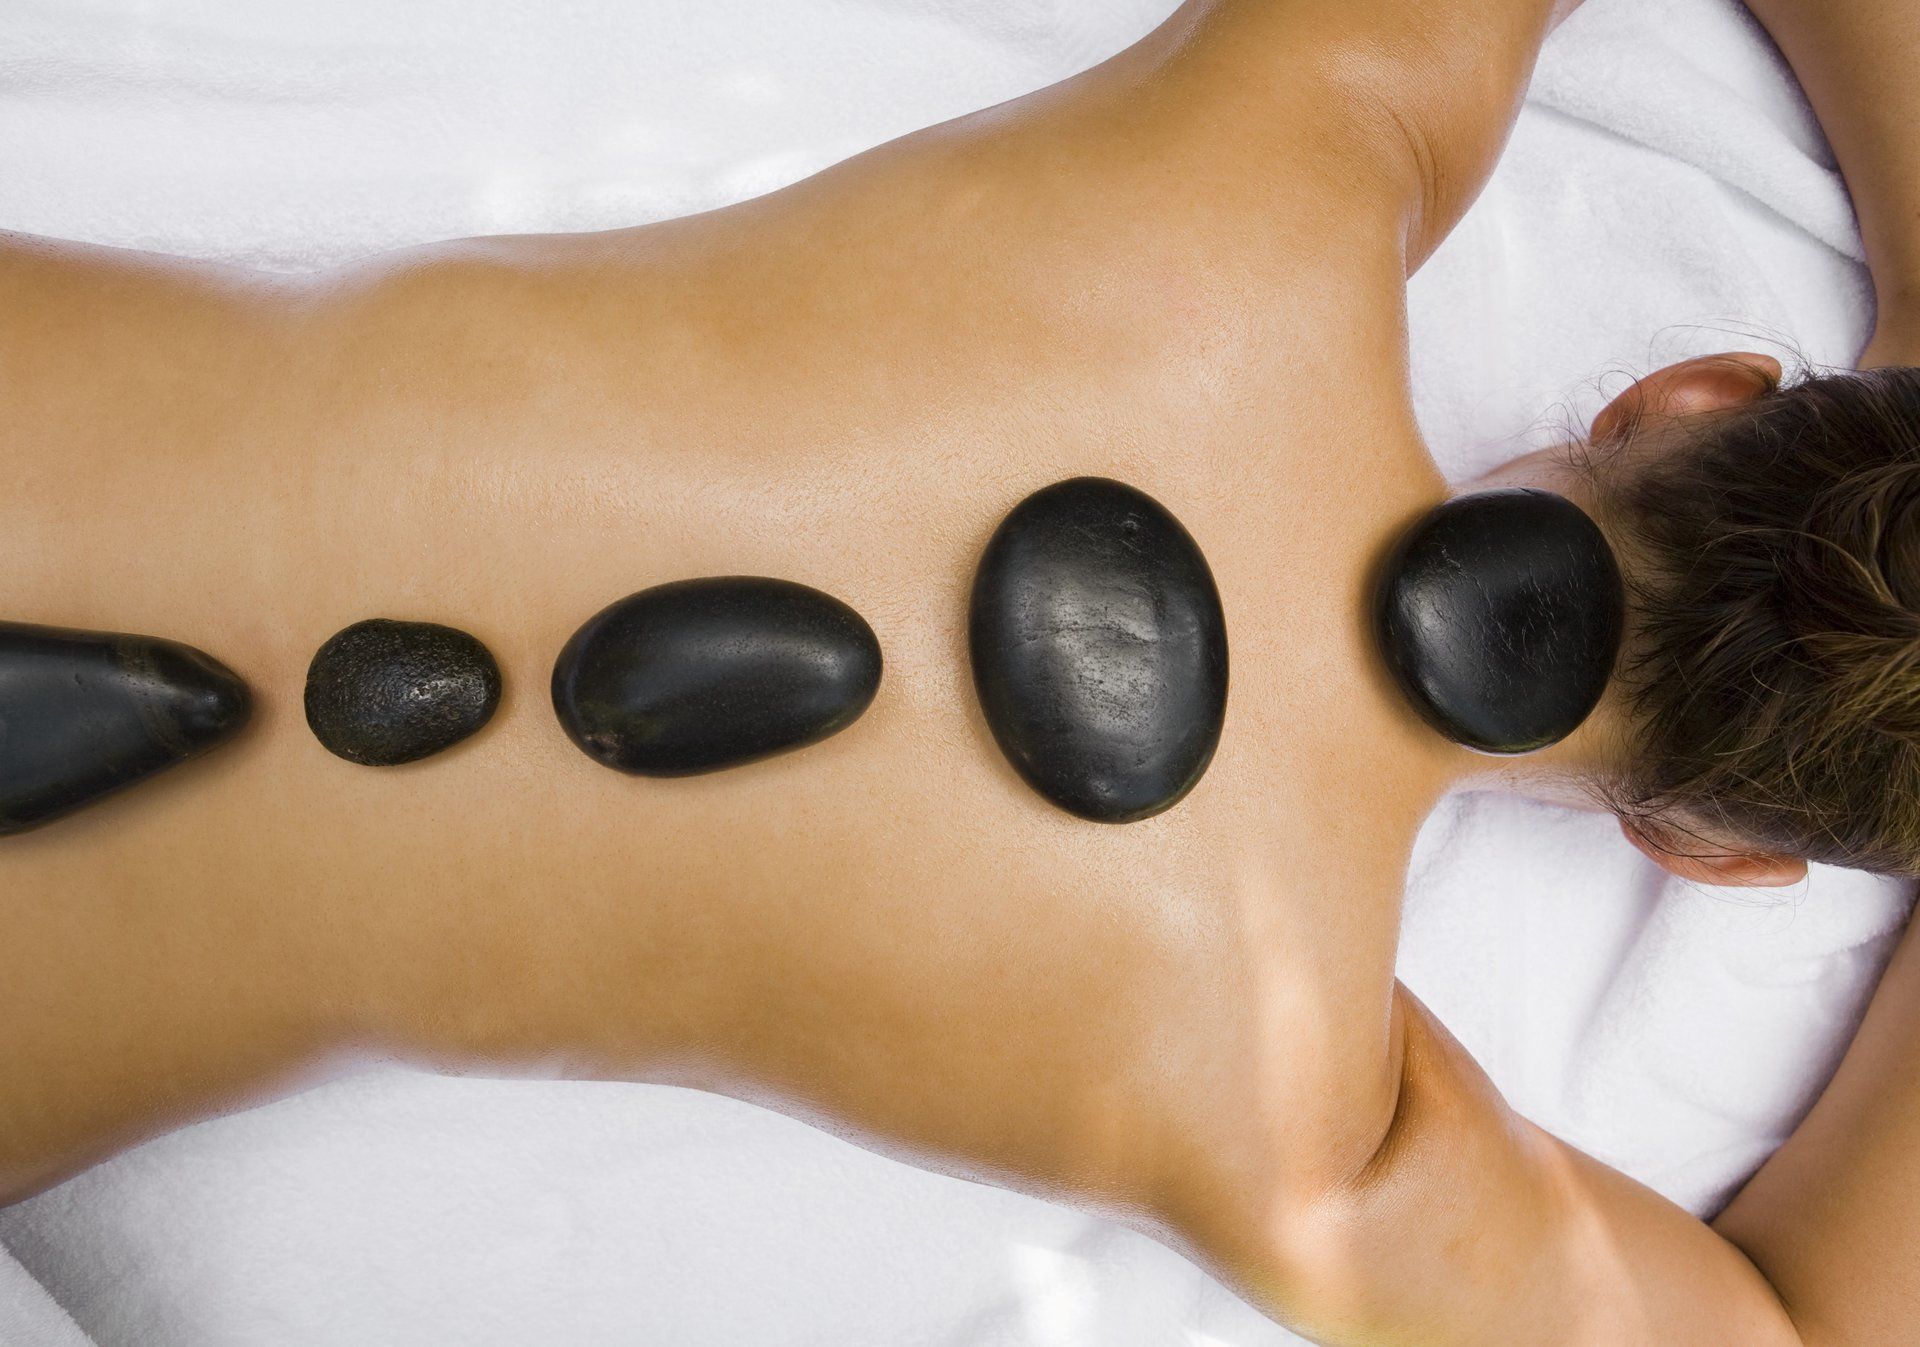 Hot stone therapy